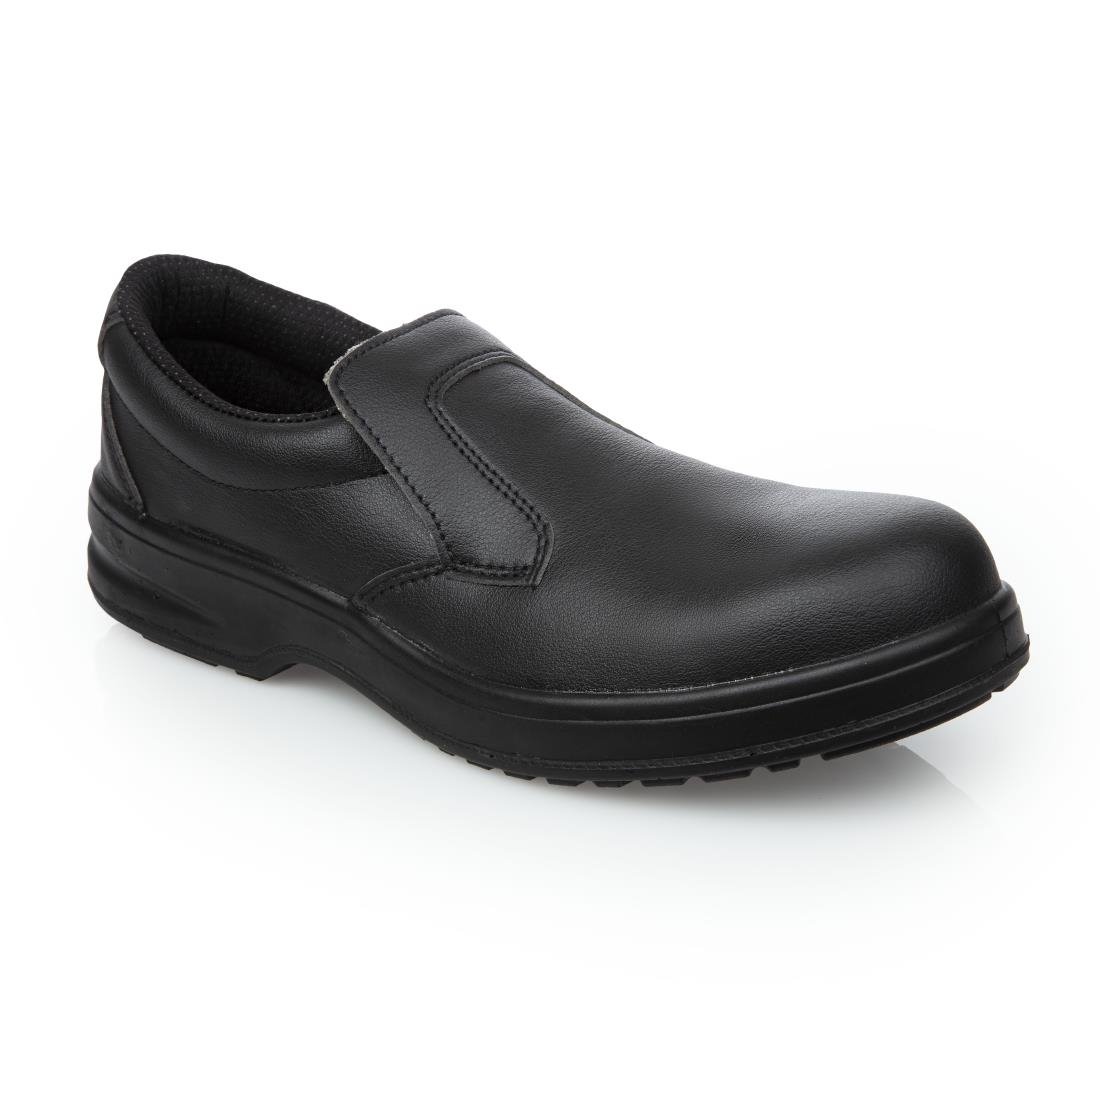 A845-41 Slipbuster Lite Slip On Safety Shoes Black 41 JD Catering Equipment Solutions Ltd